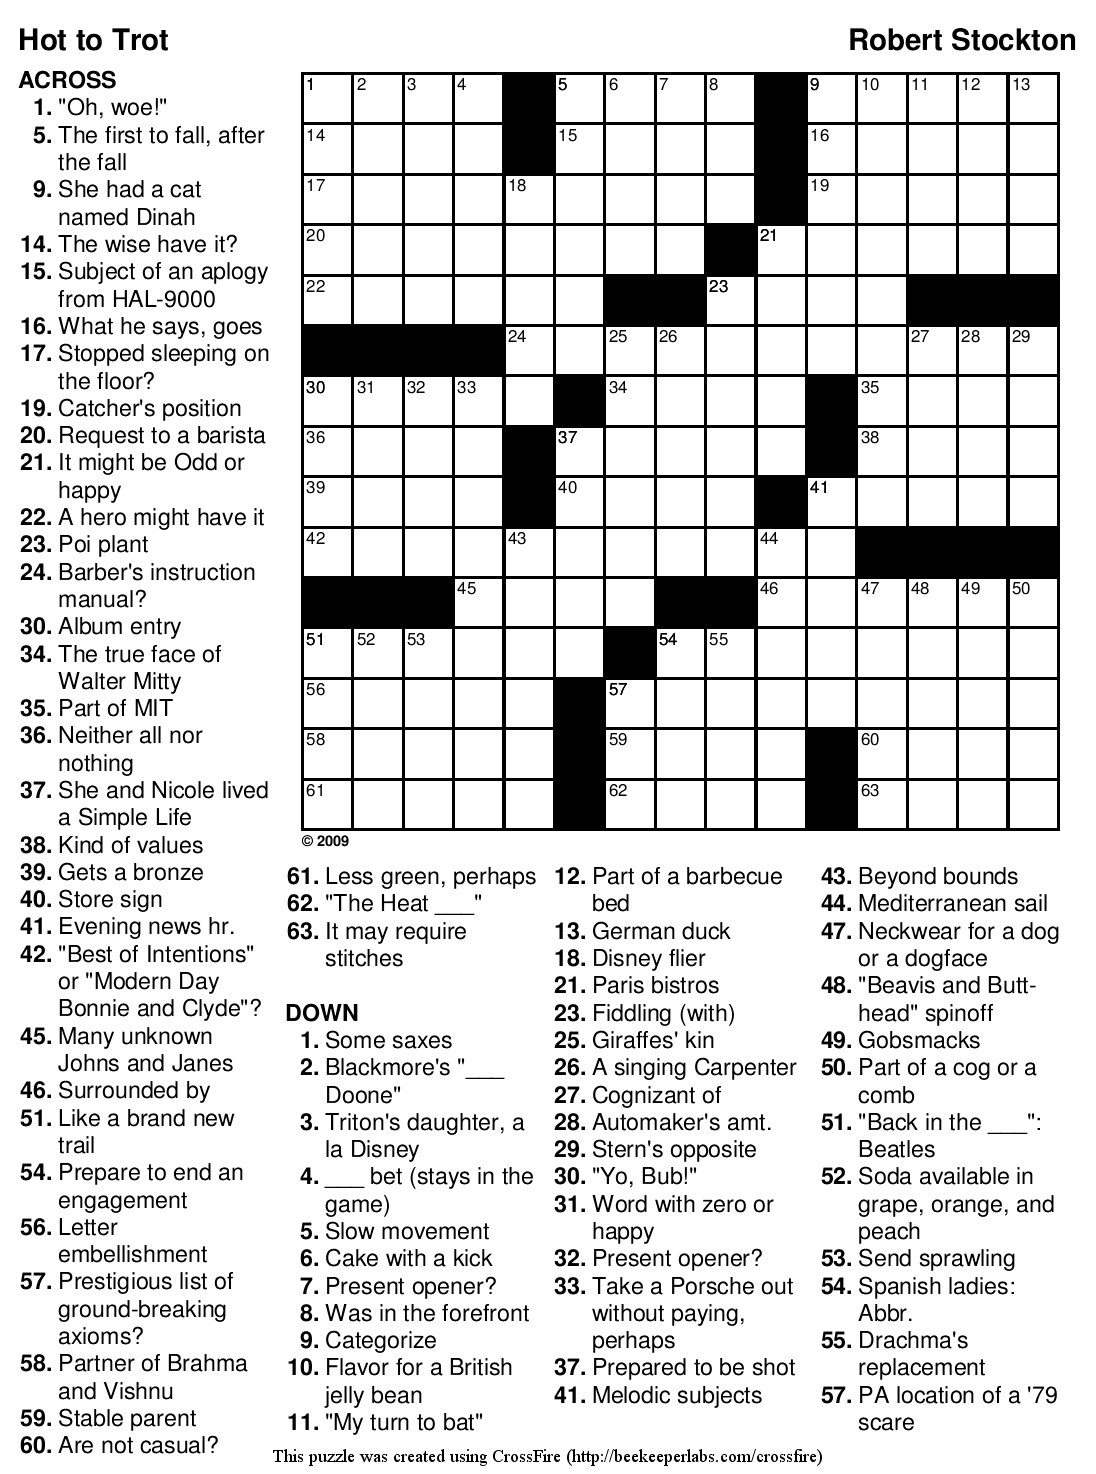 Free Printable Daily Crossword Puzzles (82+ Images In Collection) Page 1 - Printable Crossword Puzzles Pokemon